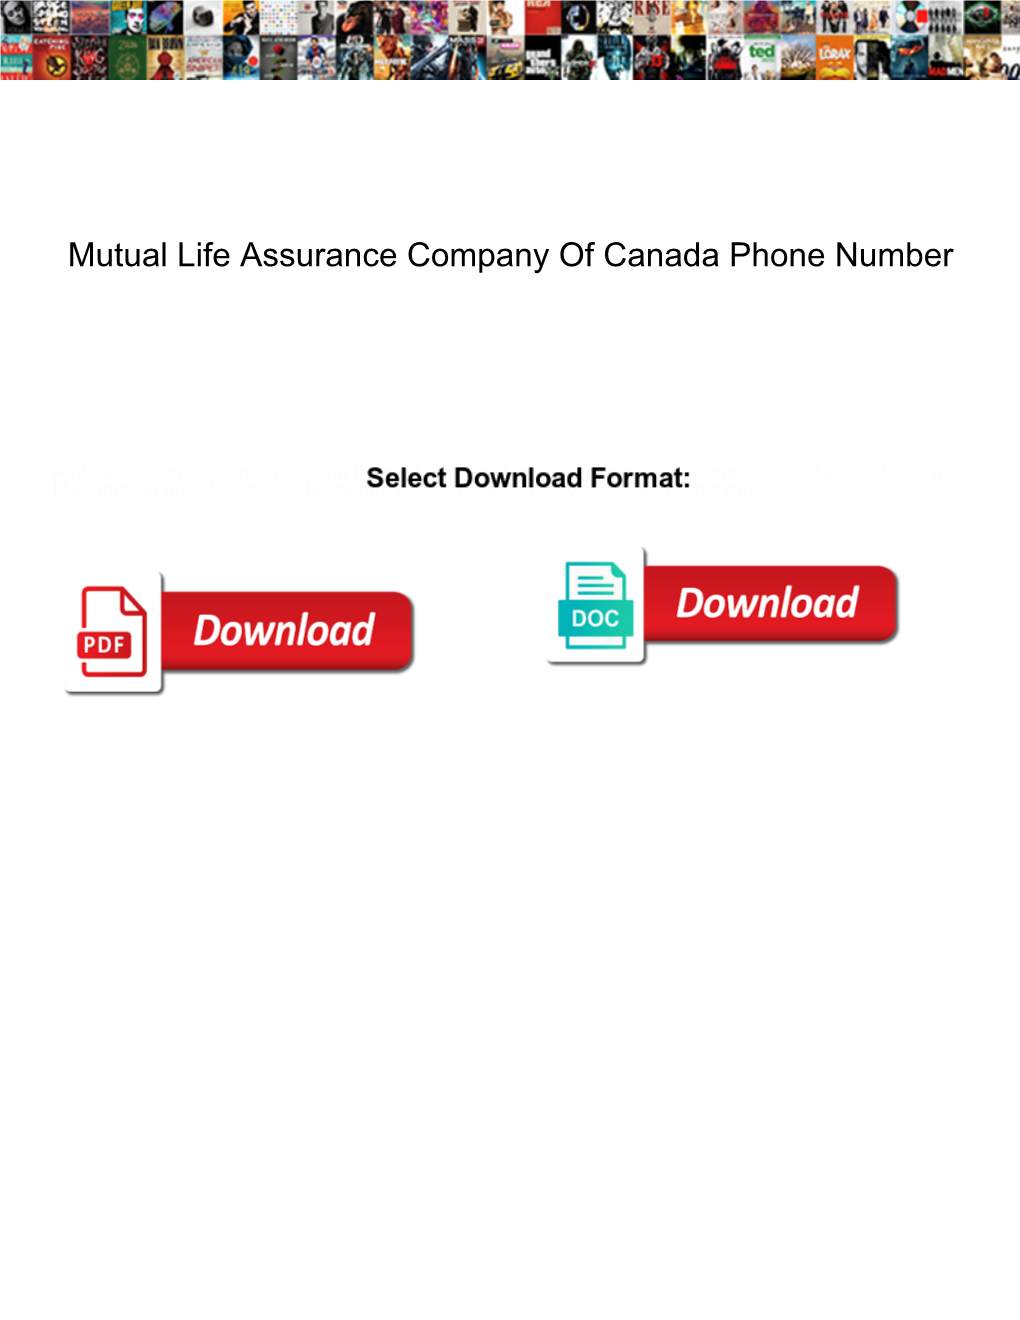 Mutual Life Assurance Company of Canada Phone Number